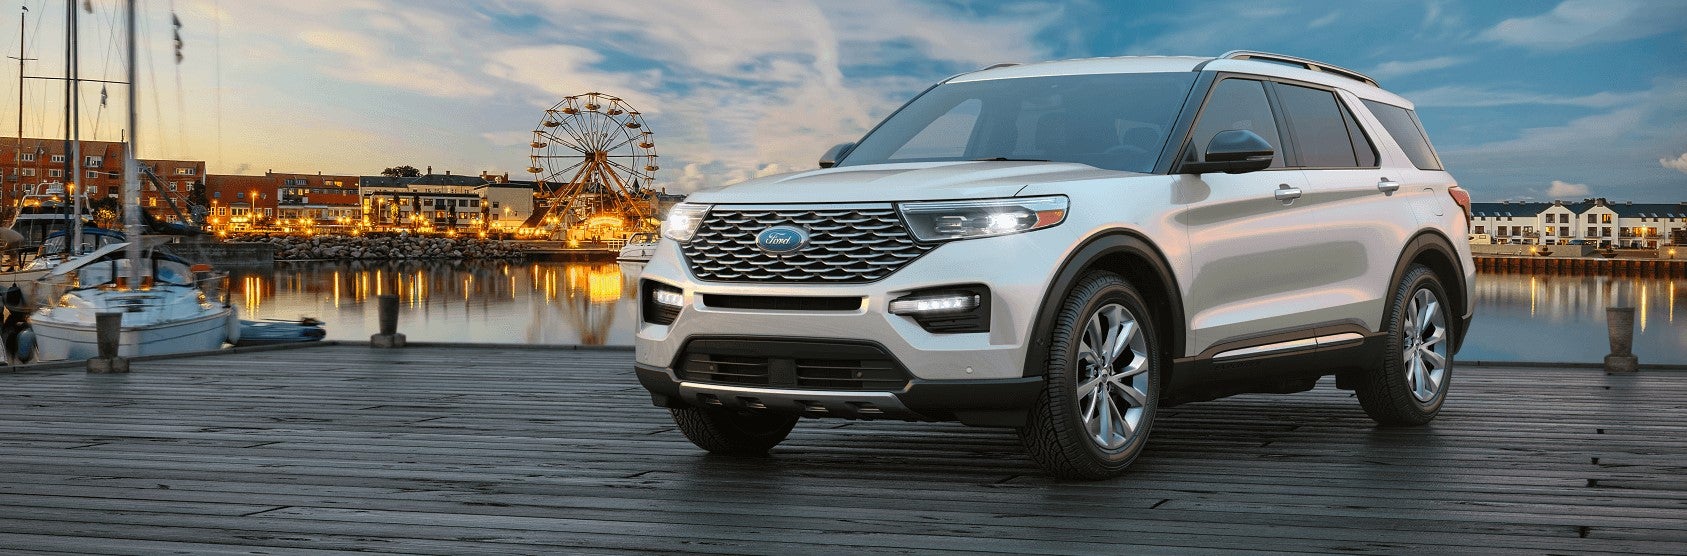 Used Ford Explorer for Sale near Suffolk VA